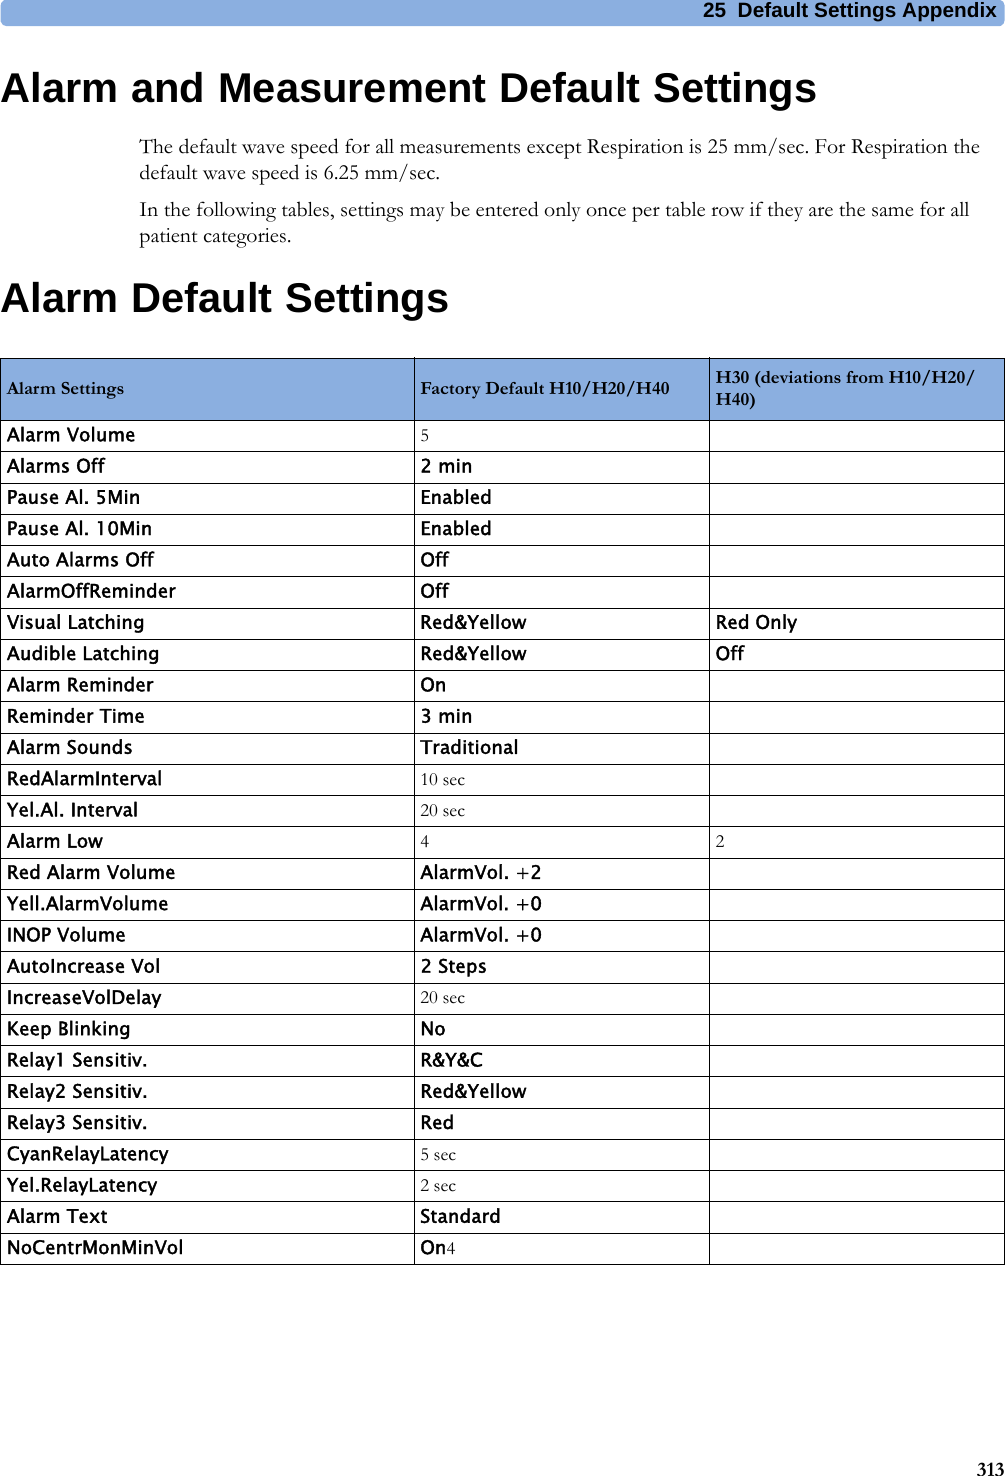 25 Default Settings Appendix313Alarm and Measurement Default SettingsThe default wave speed for all measurements except Respiration is 25 mm/sec. For Respiration the default wave speed is 6.25 mm/sec.In the following tables, settings may be entered only once per table row if they are the same for all patient categories.Alarm Default SettingsAlarm Settings Factory Default H10/H20/H40 H30 (deviations from H10/H20/H40)Alarm Volume 5Alarms Off 2 minPause Al. 5Min EnabledPause Al. 10Min EnabledAuto Alarms Off OffAlarmOffReminder OffVisual Latching Red&amp;Yellow Red OnlyAudible Latching Red&amp;Yellow OffAlarm Reminder OnReminder Time 3 minAlarm Sounds TraditionalRedAlarmInterval 10 secYel.Al. Interval 20 secAlarm Low 42Red Alarm Volume AlarmVol. +2Yell.AlarmVolume AlarmVol. +0INOP Volume AlarmVol. +0AutoIncrease Vol 2 StepsIncreaseVolDelay 20 secKeep Blinking NoRelay1 Sensitiv. R&amp;Y&amp;CRelay2 Sensitiv. Red&amp;YellowRelay3 Sensitiv. RedCyanRelayLatency 5secYel.RelayLatency 2secAlarm Text StandardNoCentrMonMinVol On4